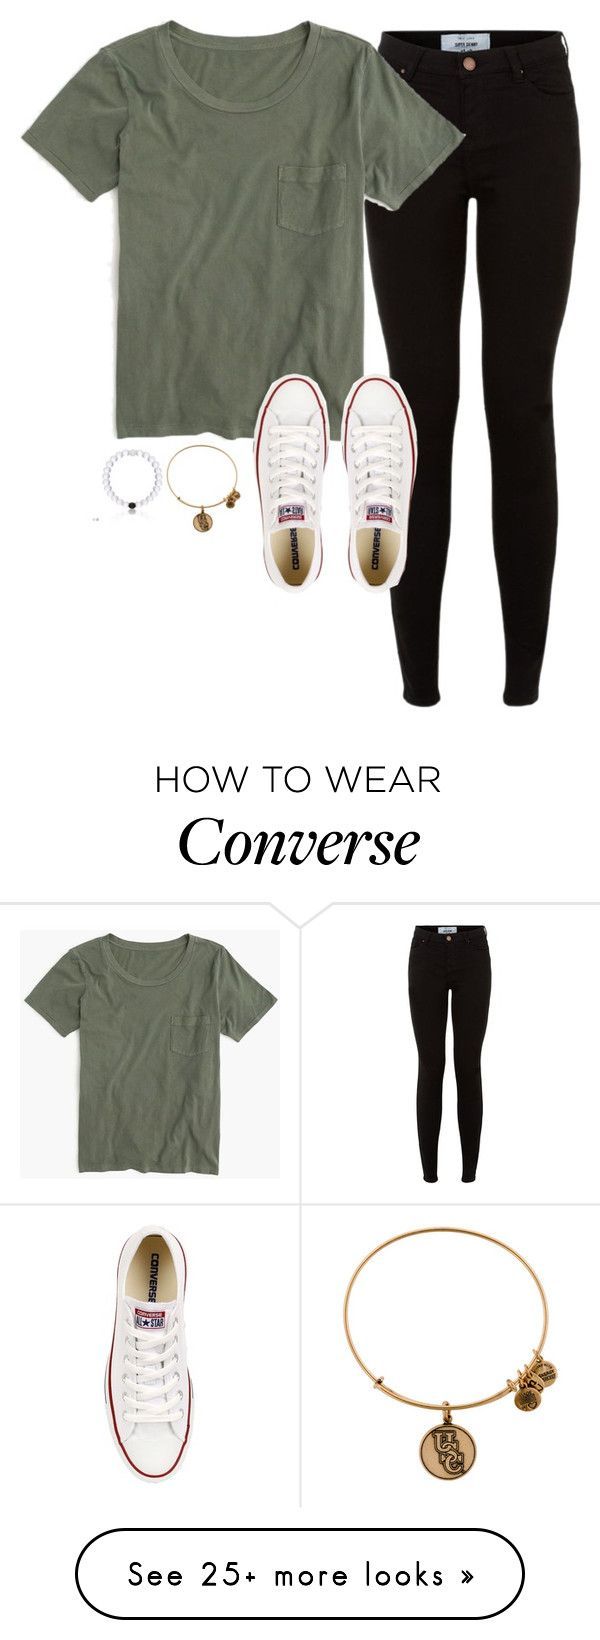 “Shawn Mendes Tomorrow” by lizzielane33 on Polyvore featuring J.Crew, Converse and Alex and Ani